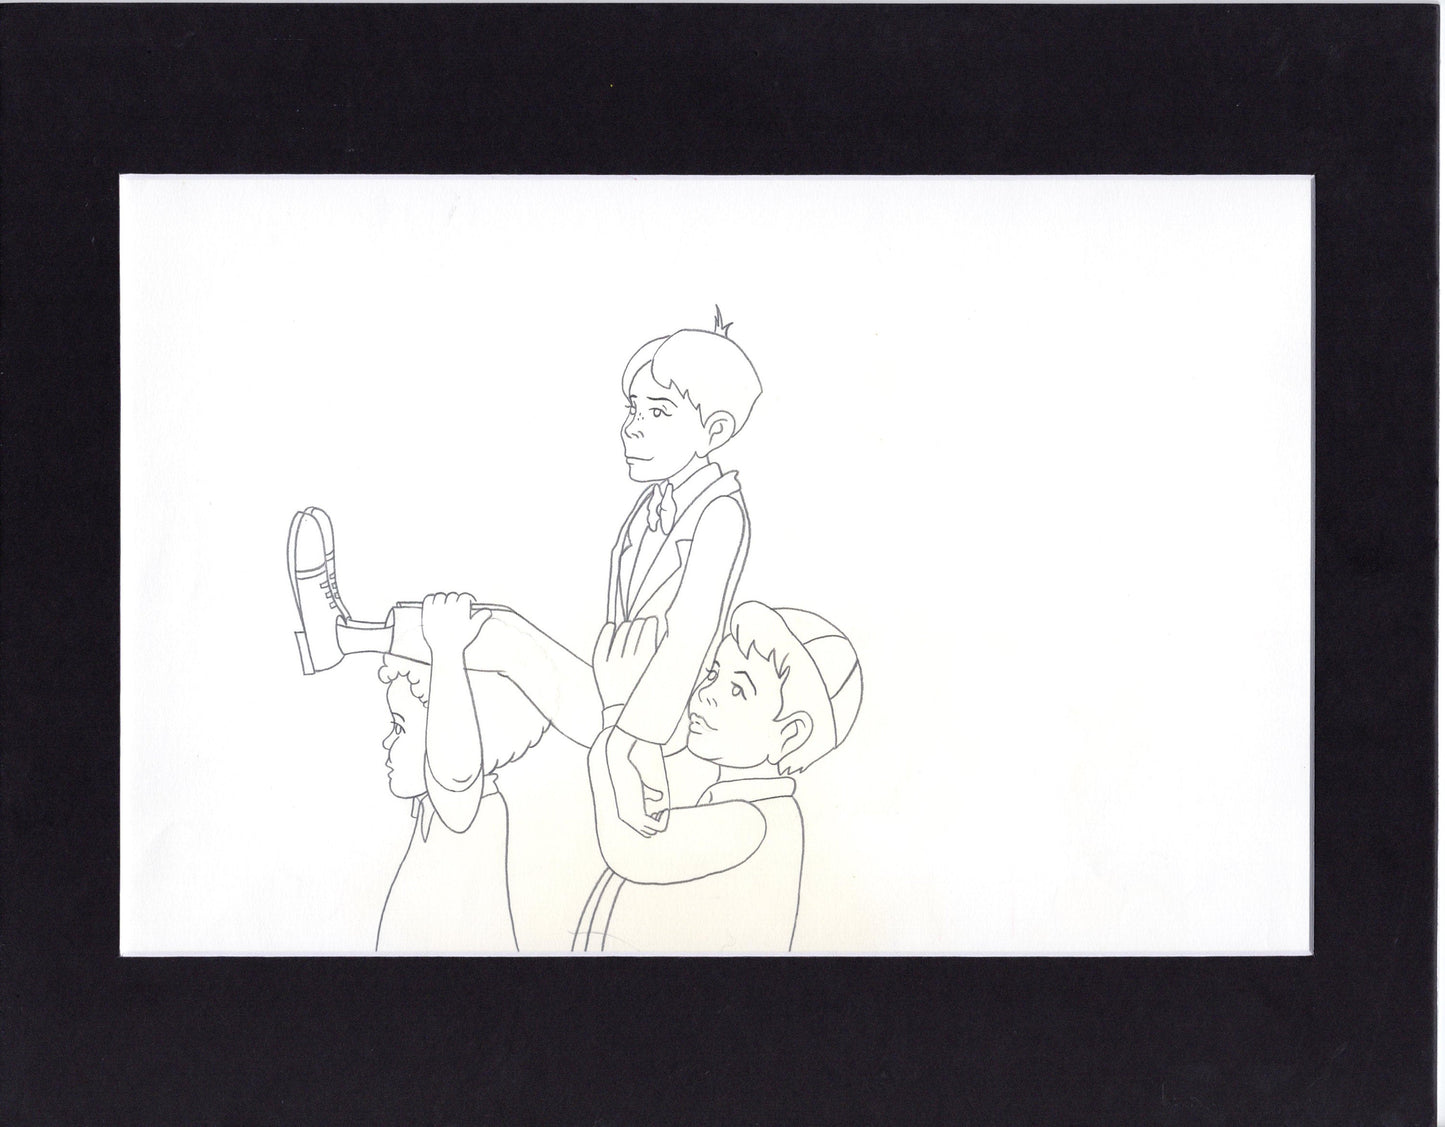 Little Rascals Production Animation Cel Drawing with Alfalfa from Hanna Barbera 1982-83 85